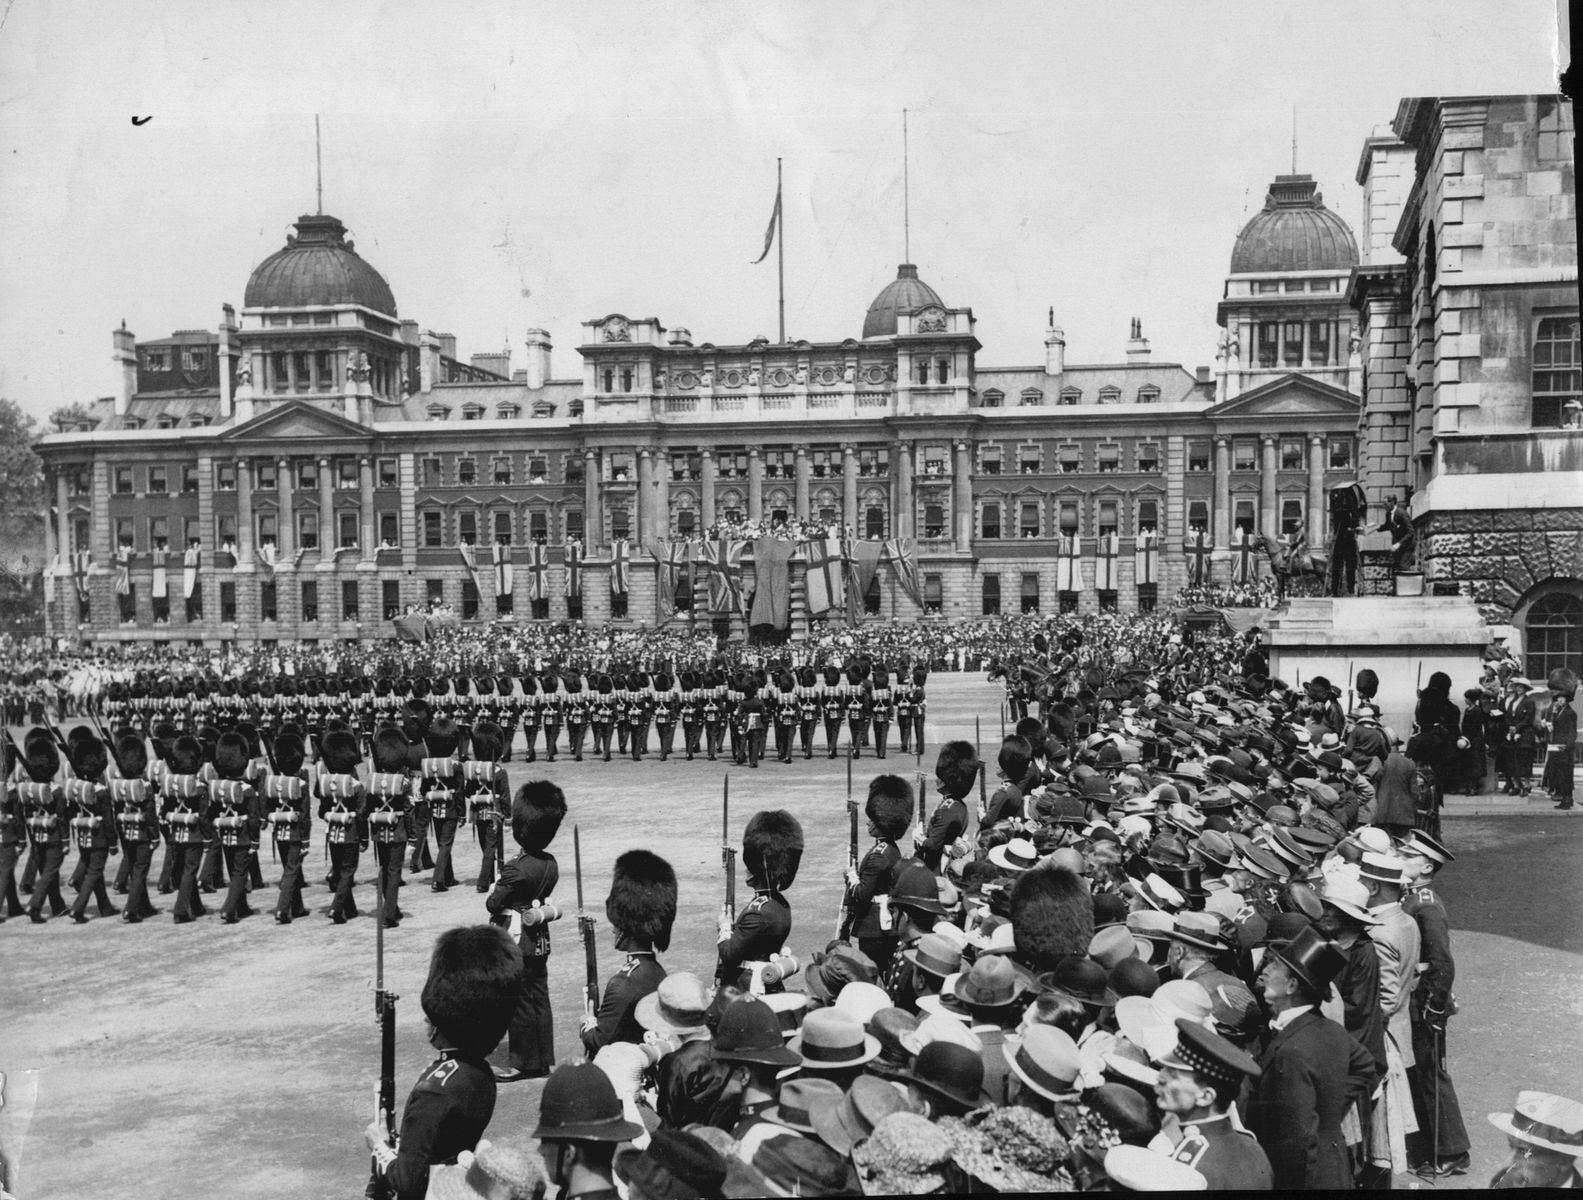 <p>The <a href="https://www.royal.uk/trooping-colour">Trooping of the Colour</a> marks the official birthday celebration of the British Sovereign. In 1922, that was <a href="https://www.biography.com/royalty/george-v">George V</a>, who served as King of the United Kingdom from 1910 to 1936.</p>